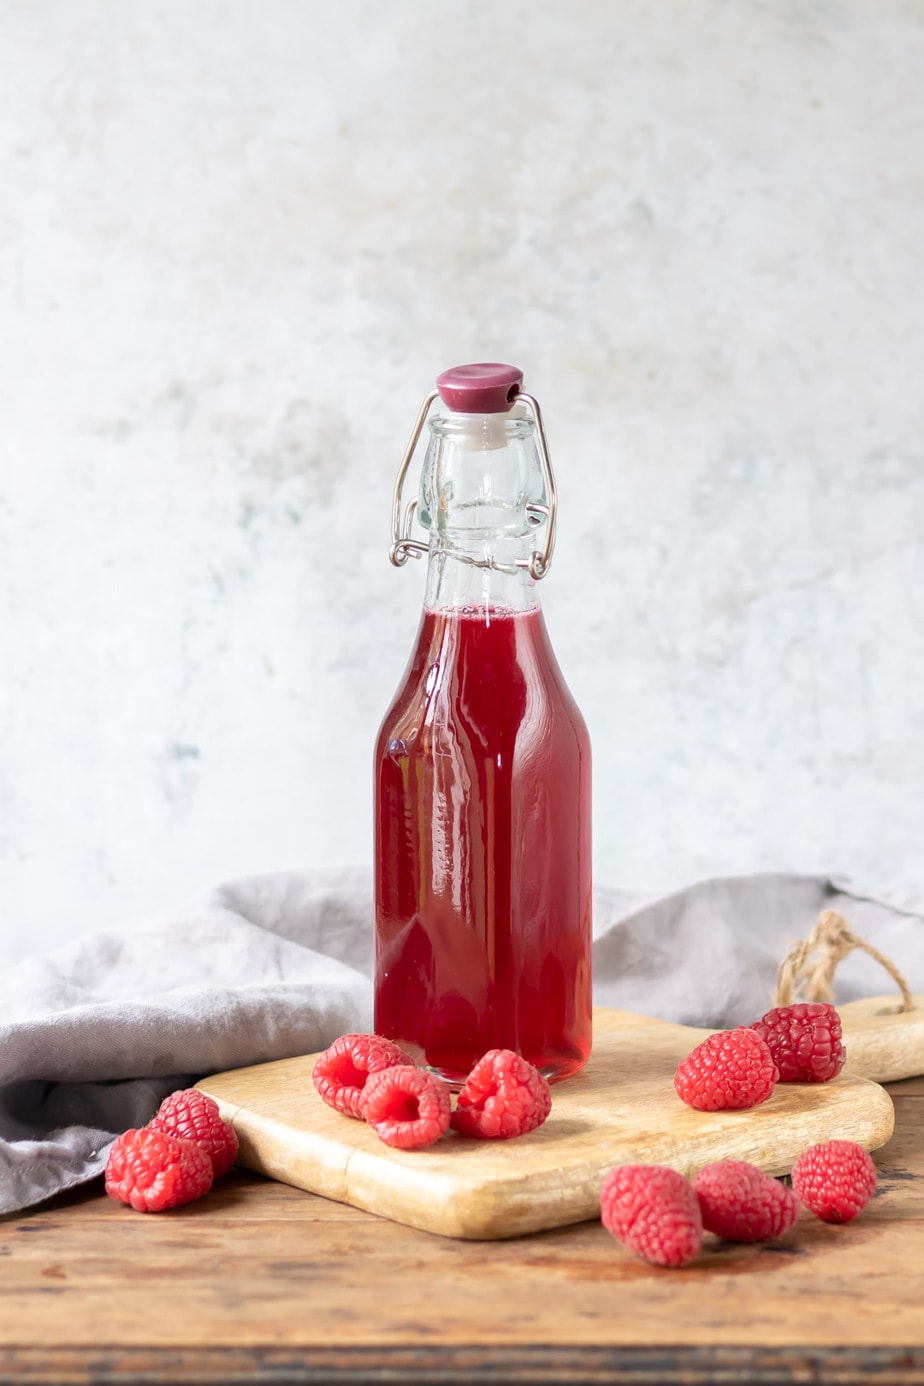 Bottle of syrup next to raspberries.